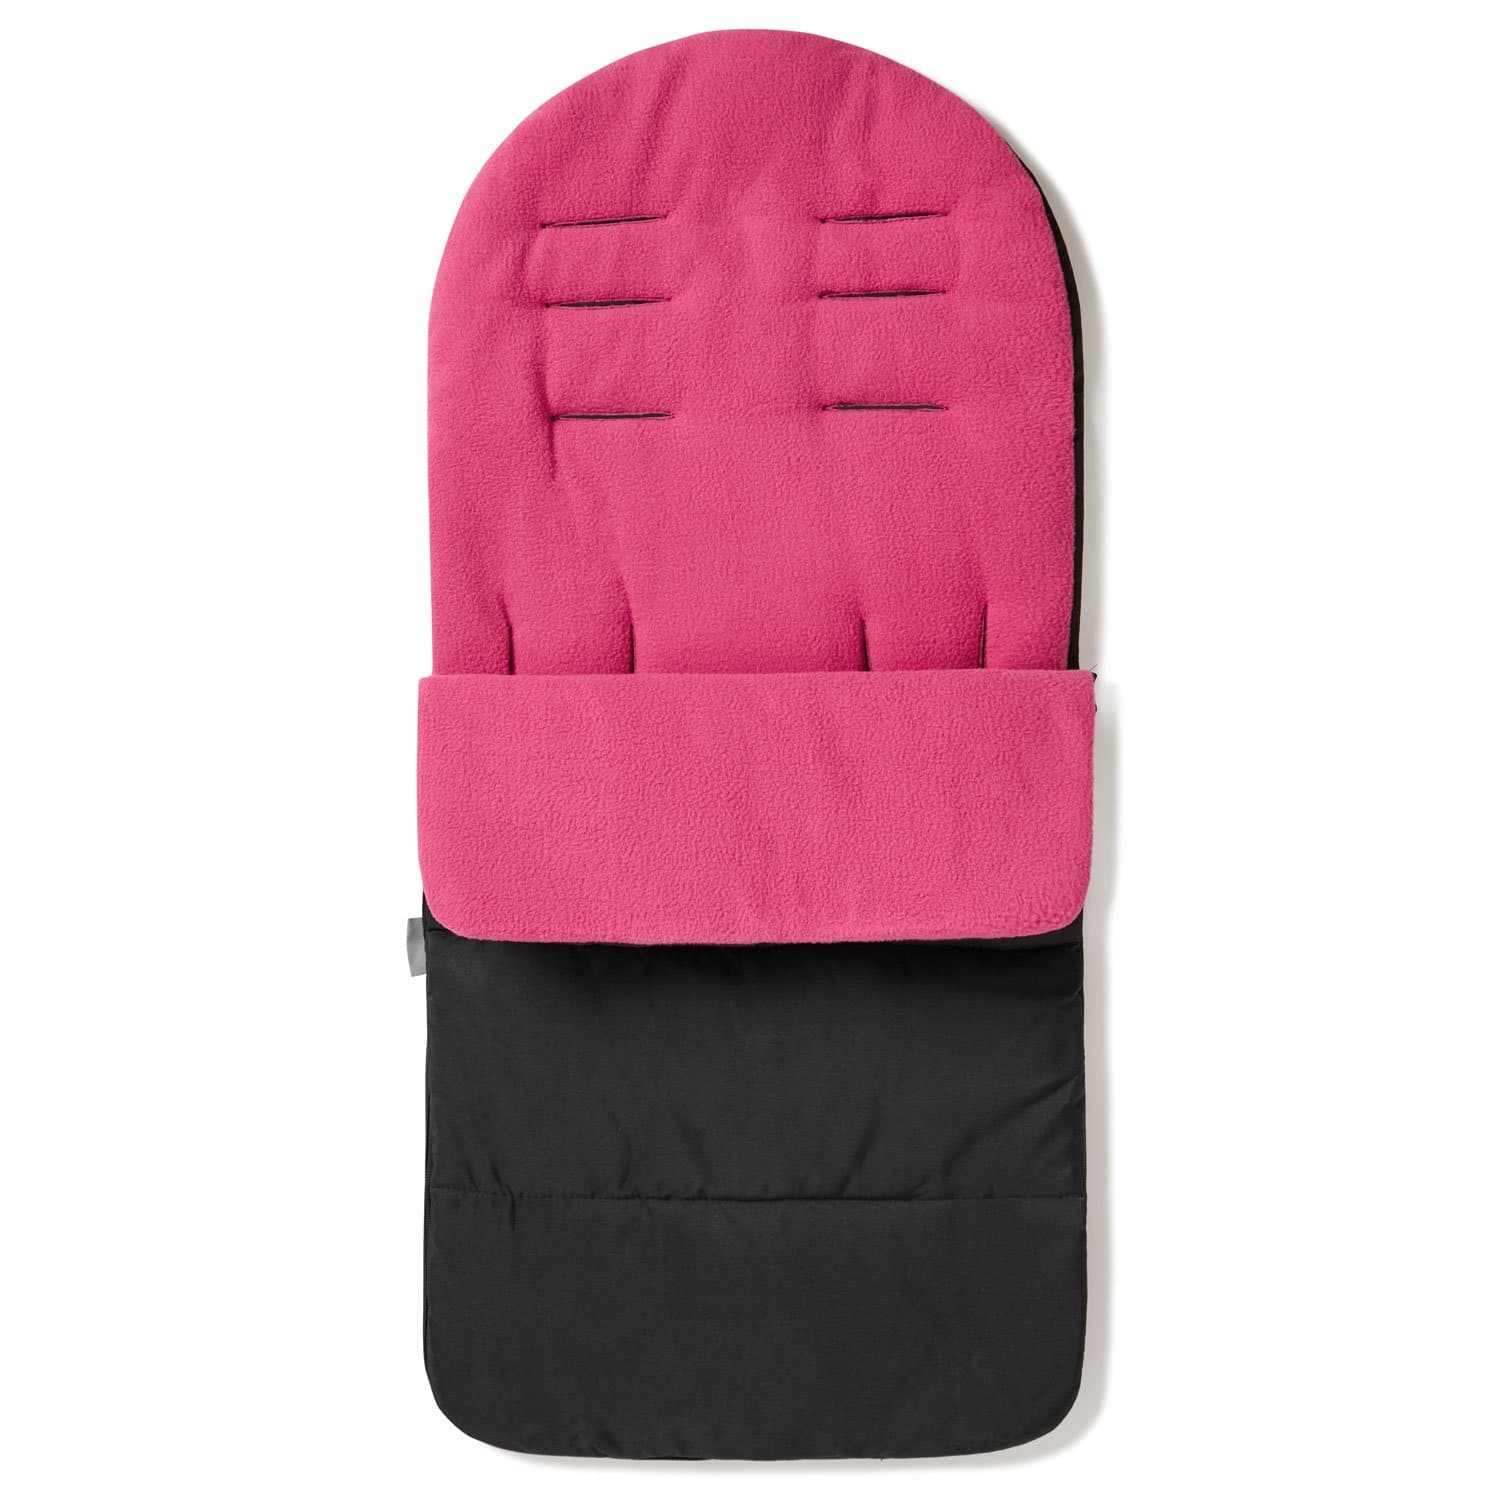 Premium Footmuff / Cosy Toes Compatible with Little Shield - Pink Rose / Fits All Models | For Your Little One